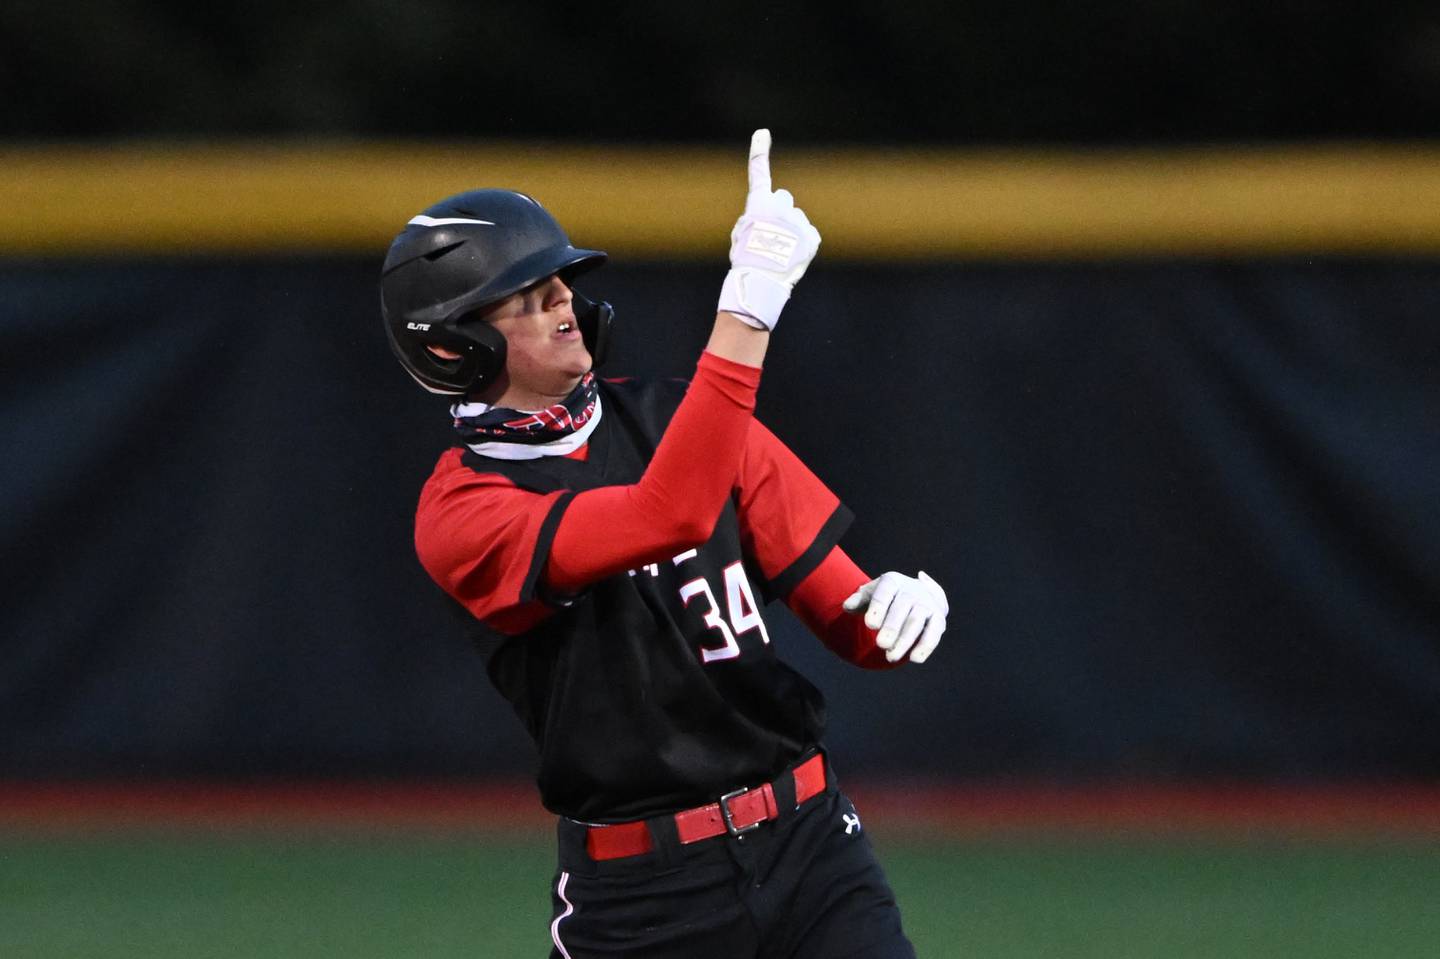 Martin Spalding's Nate Wines gestures after hitting a double against Calvert Hall during a High School baseball game Friday, March 24, 2023 in Towson, Md.